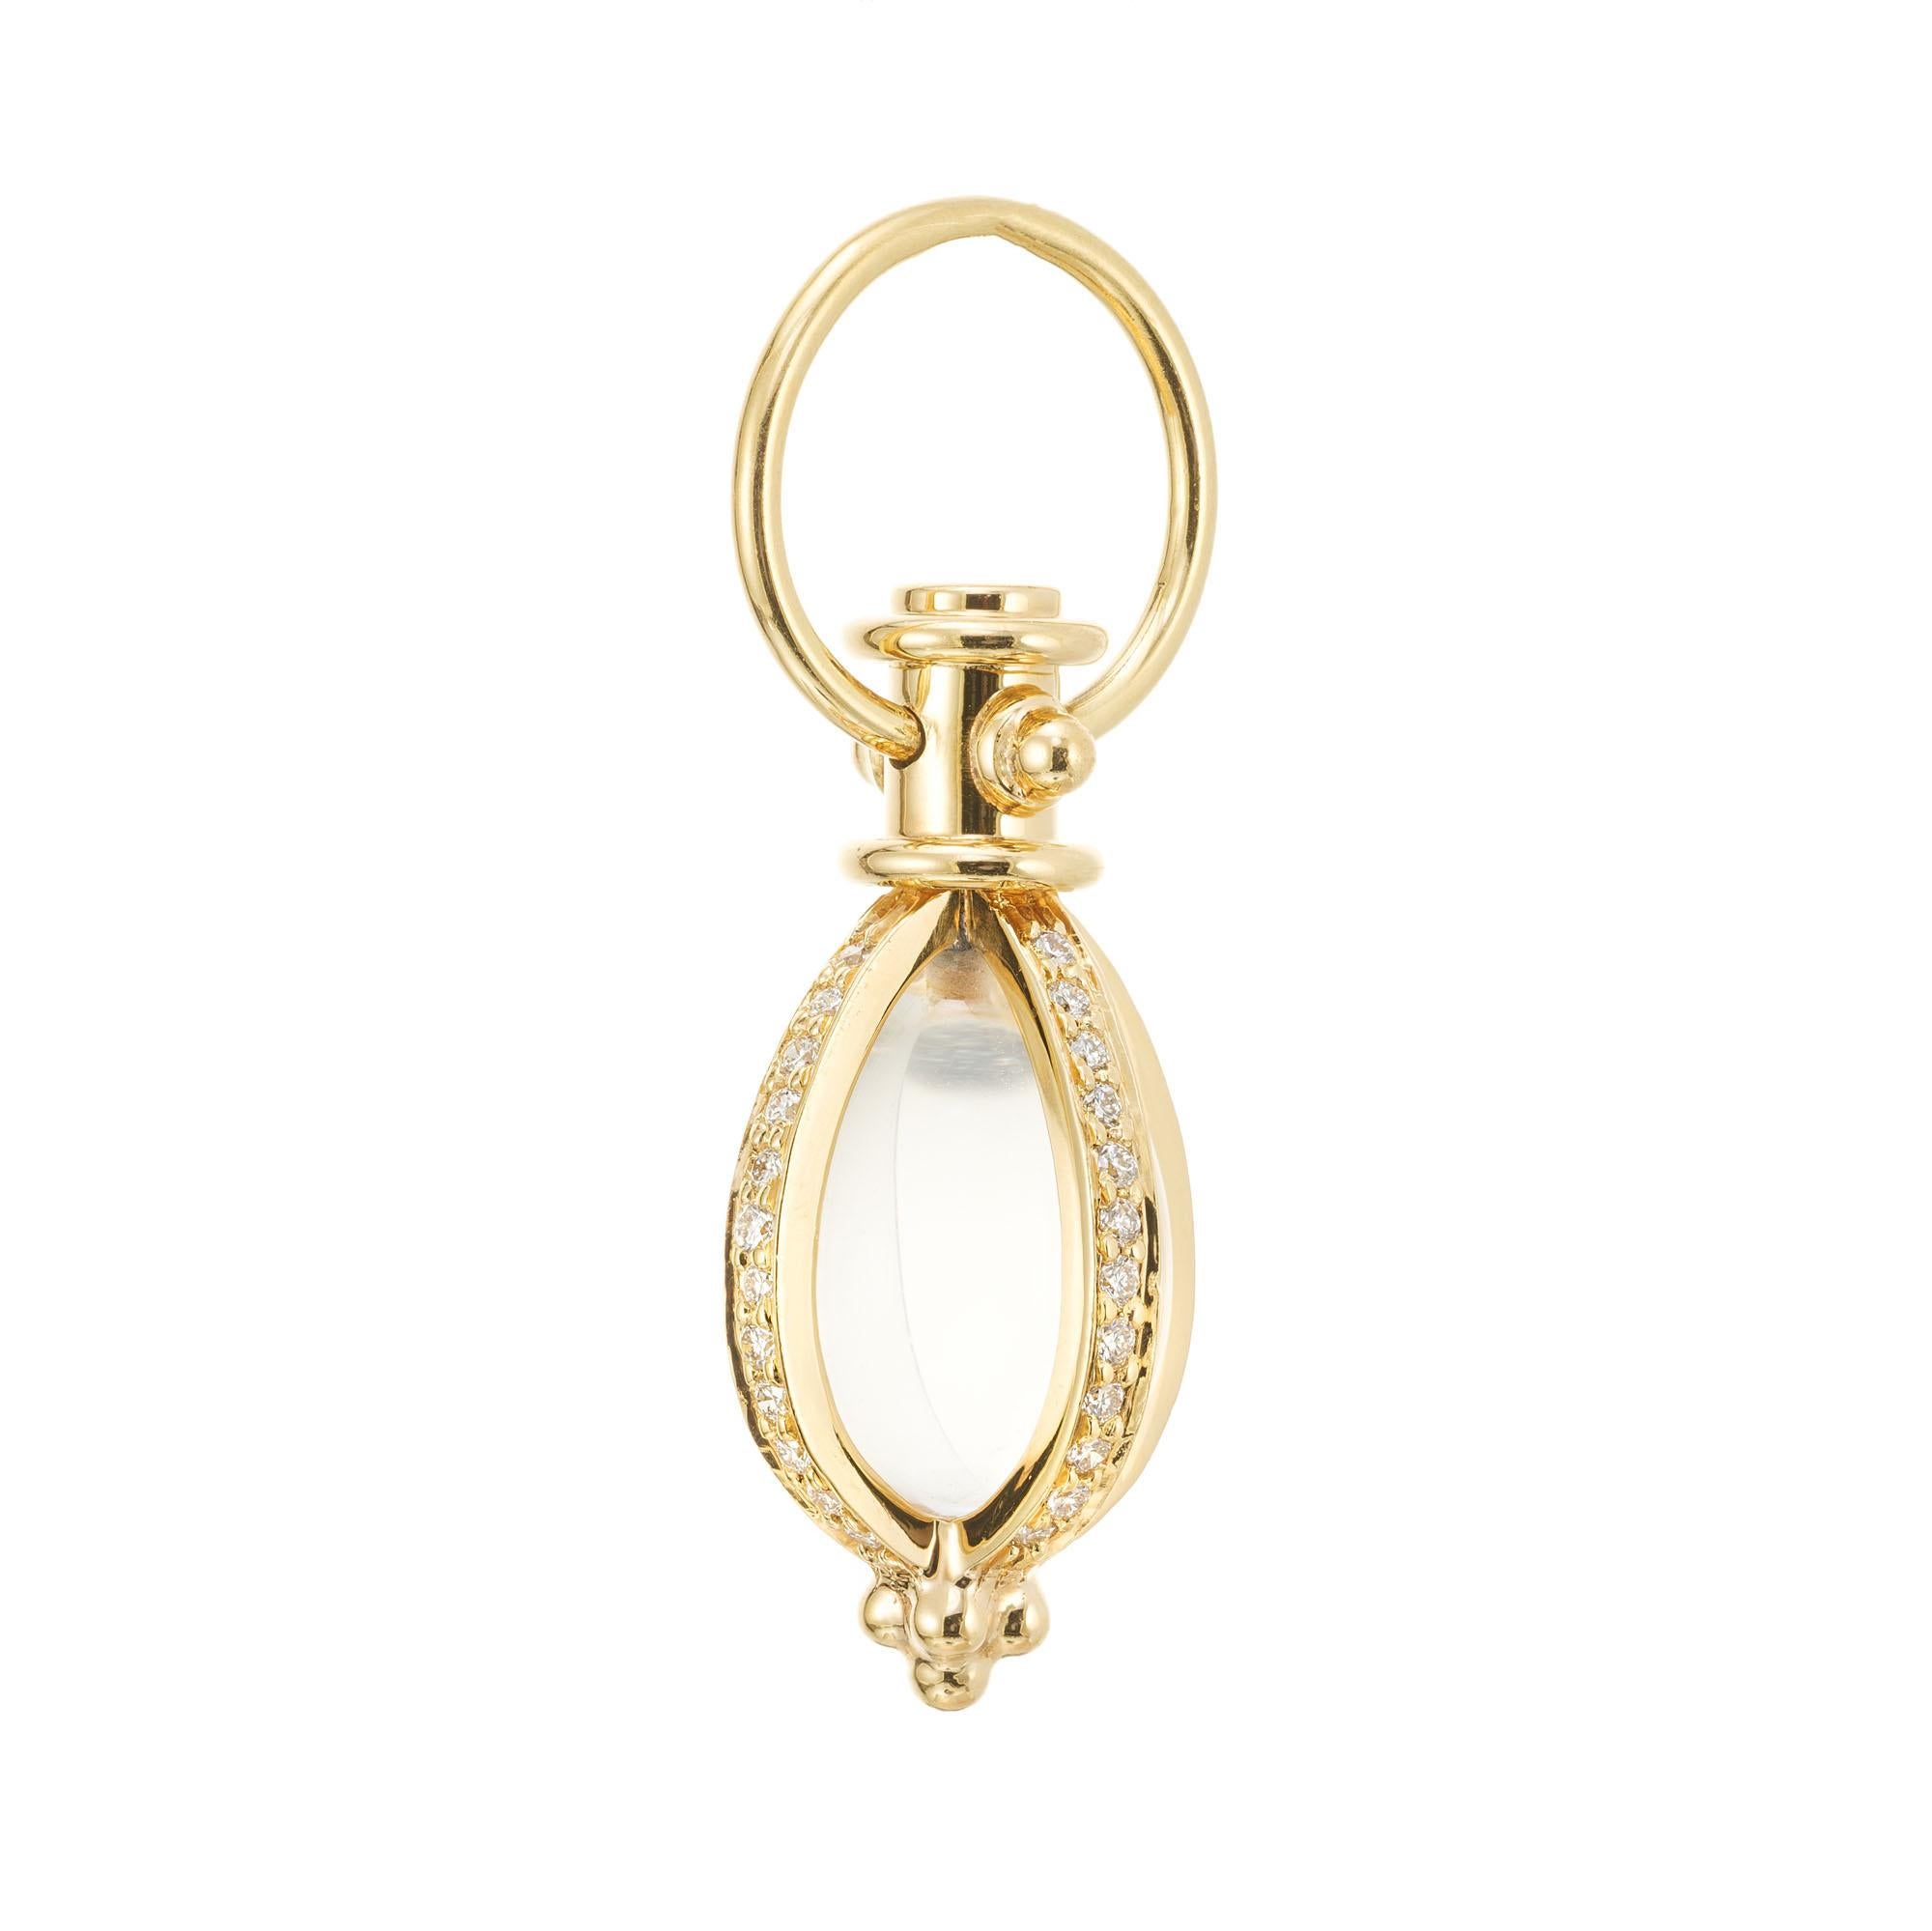 Temple St Clair pave diamond and quartz crystal amulet pendant. The focal point of this piece is a mesmerizing quartz crystal which is ensconced in 18k yellow gold with 48 pave diamonds along each row. This exquisite pendant showcases the perfect